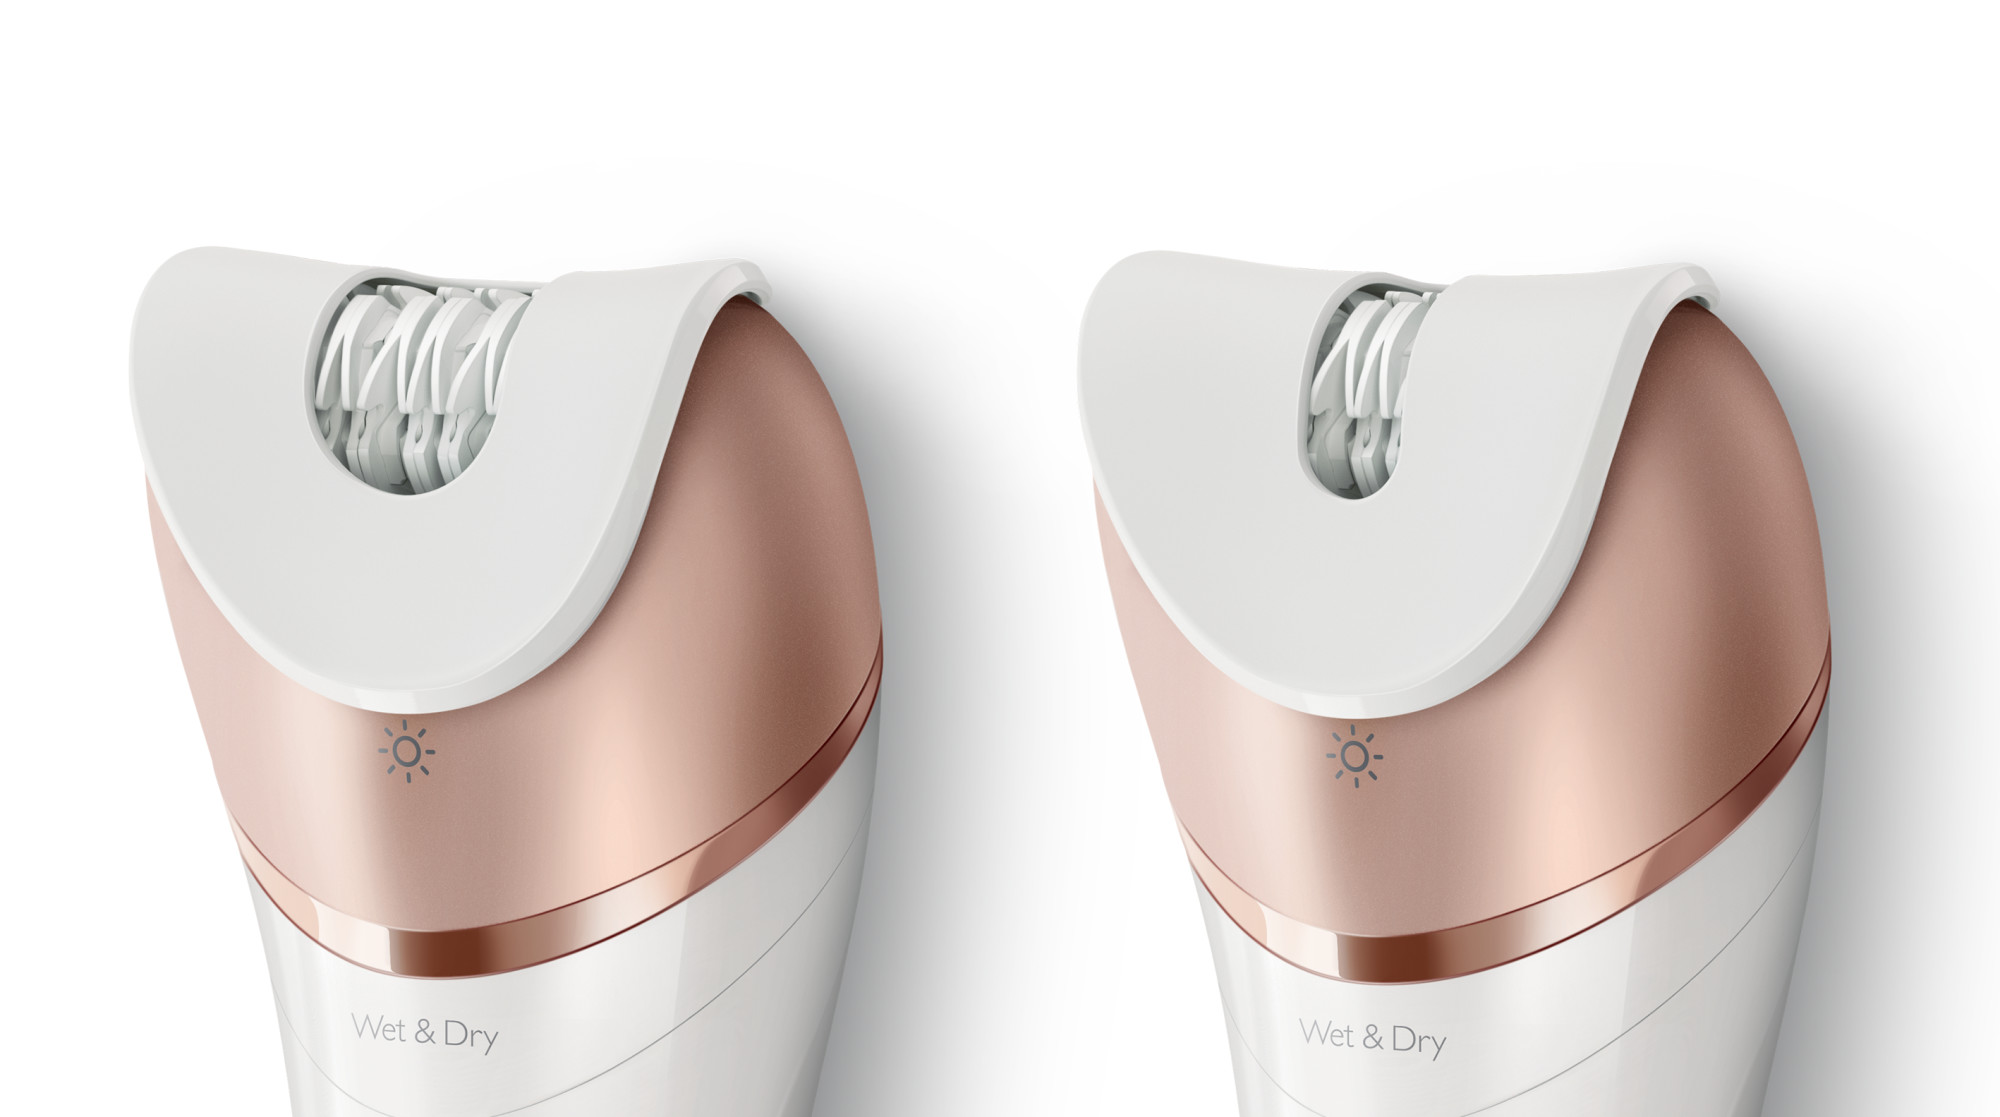 Philips Satinelle Prestige Epilator, Wet & Dry Electric Hair Removal, Body Exfoliation and Massage (Bre648) - image 5 of 14